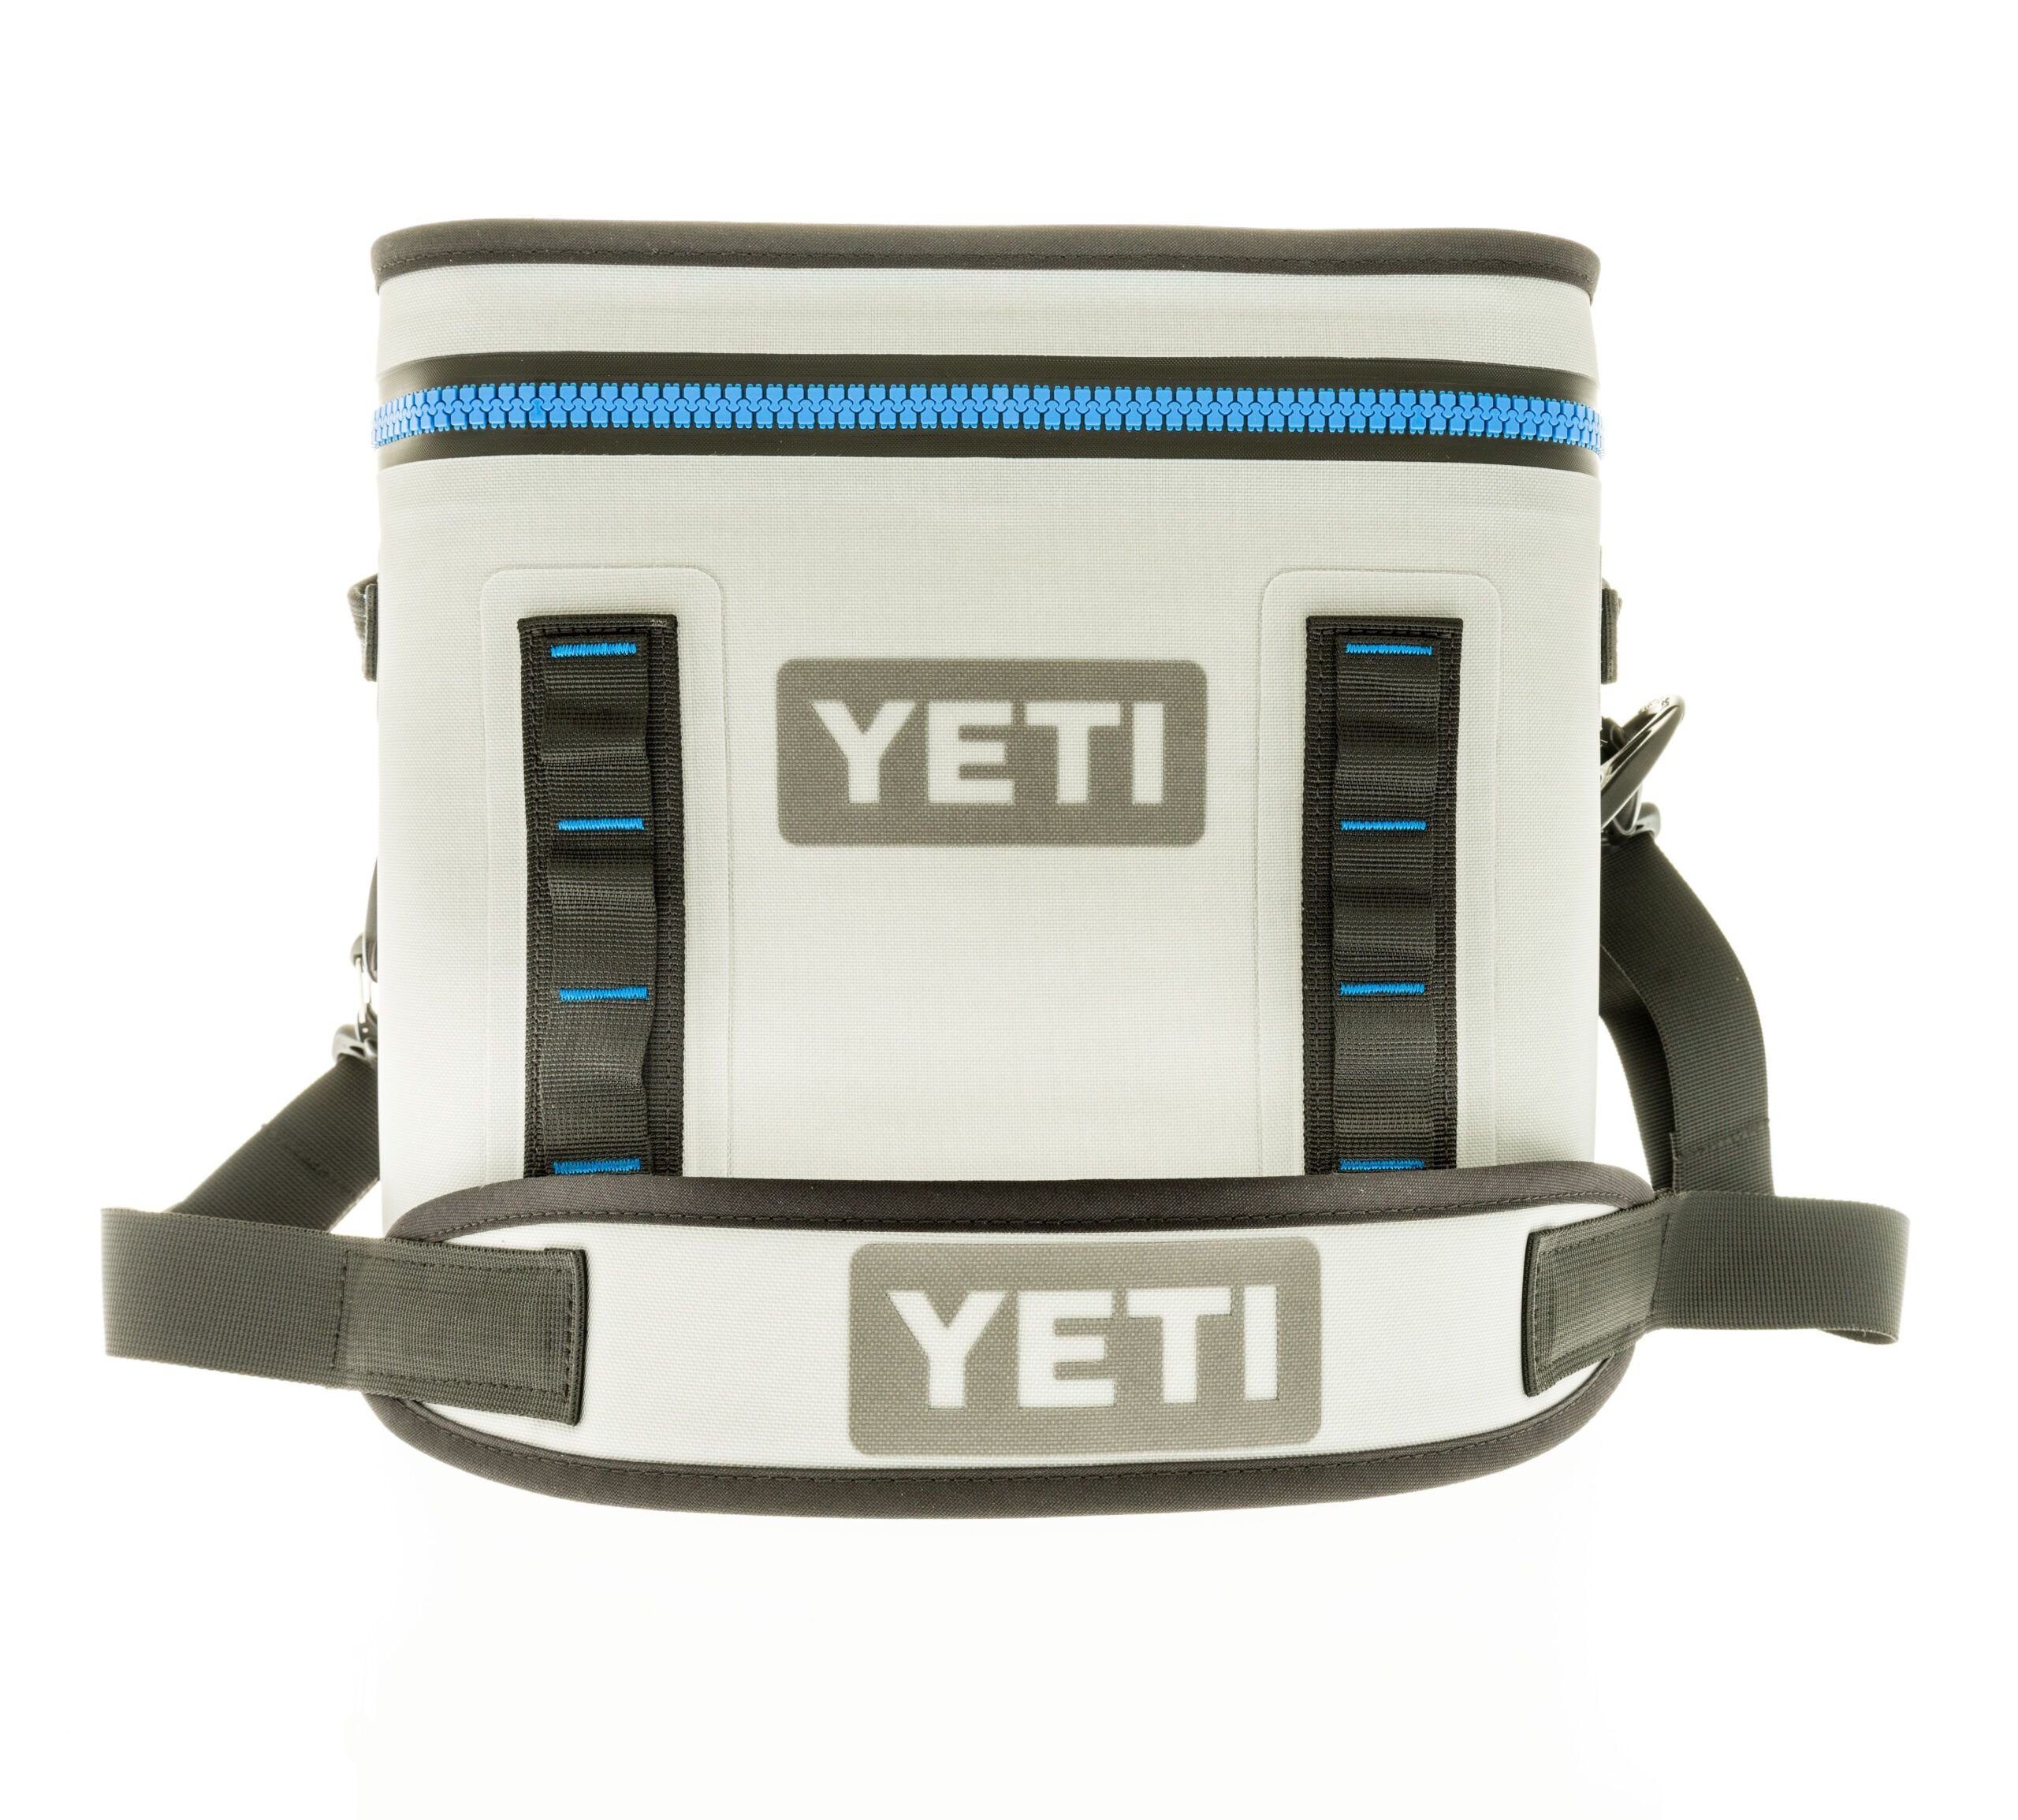 Yeti Raises Outlook While Managing Recall Issue in Q2